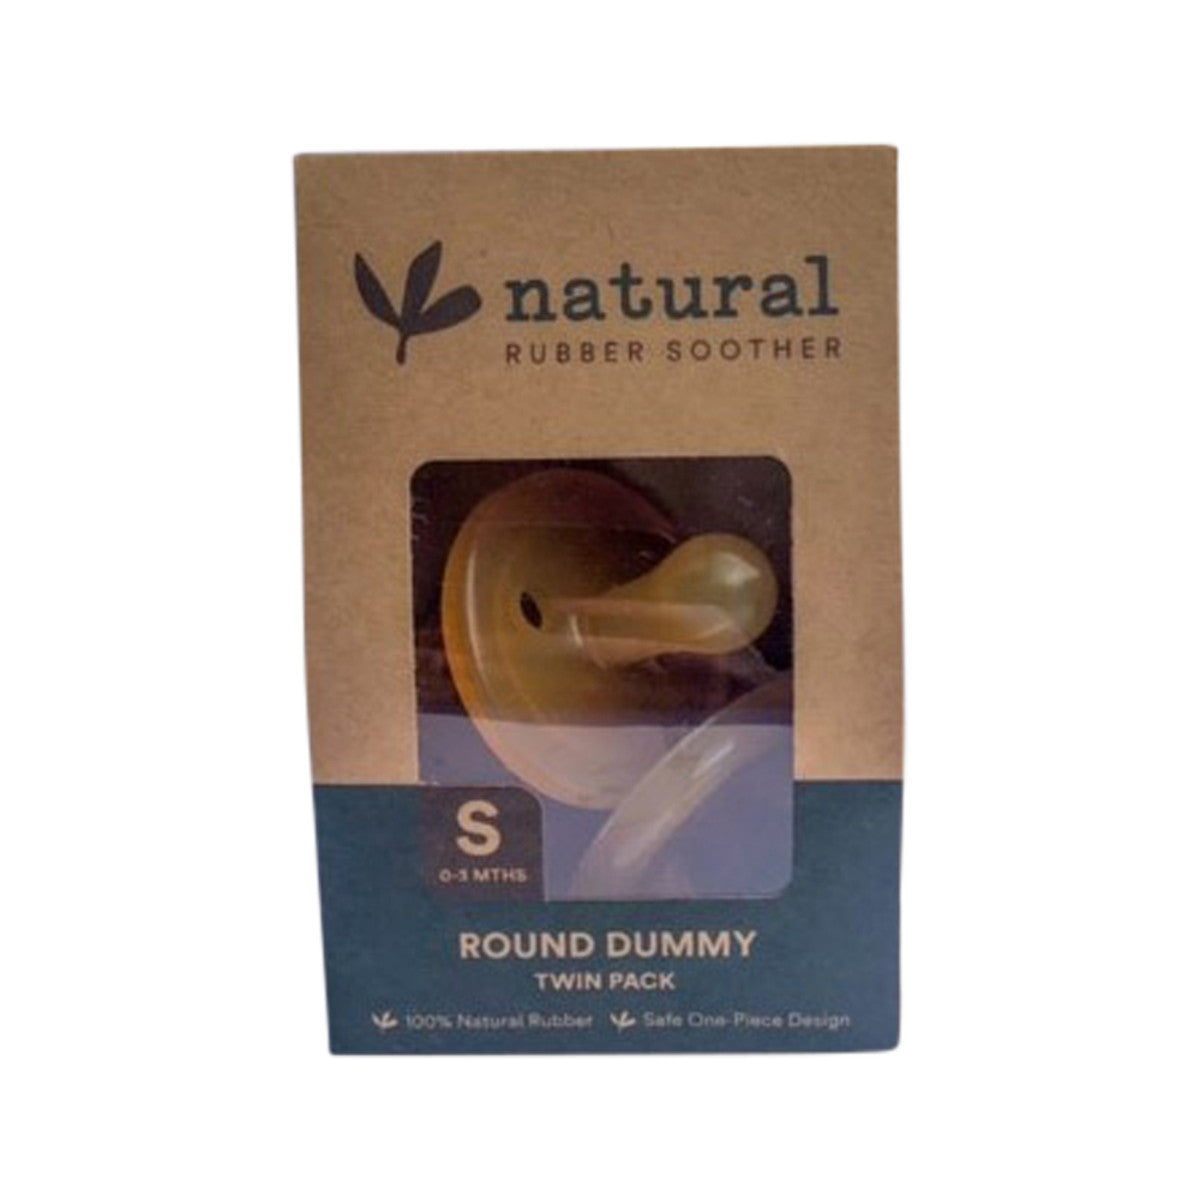 Natural Rubber Soother - Round Dummy Small (0-3 Months) Twin